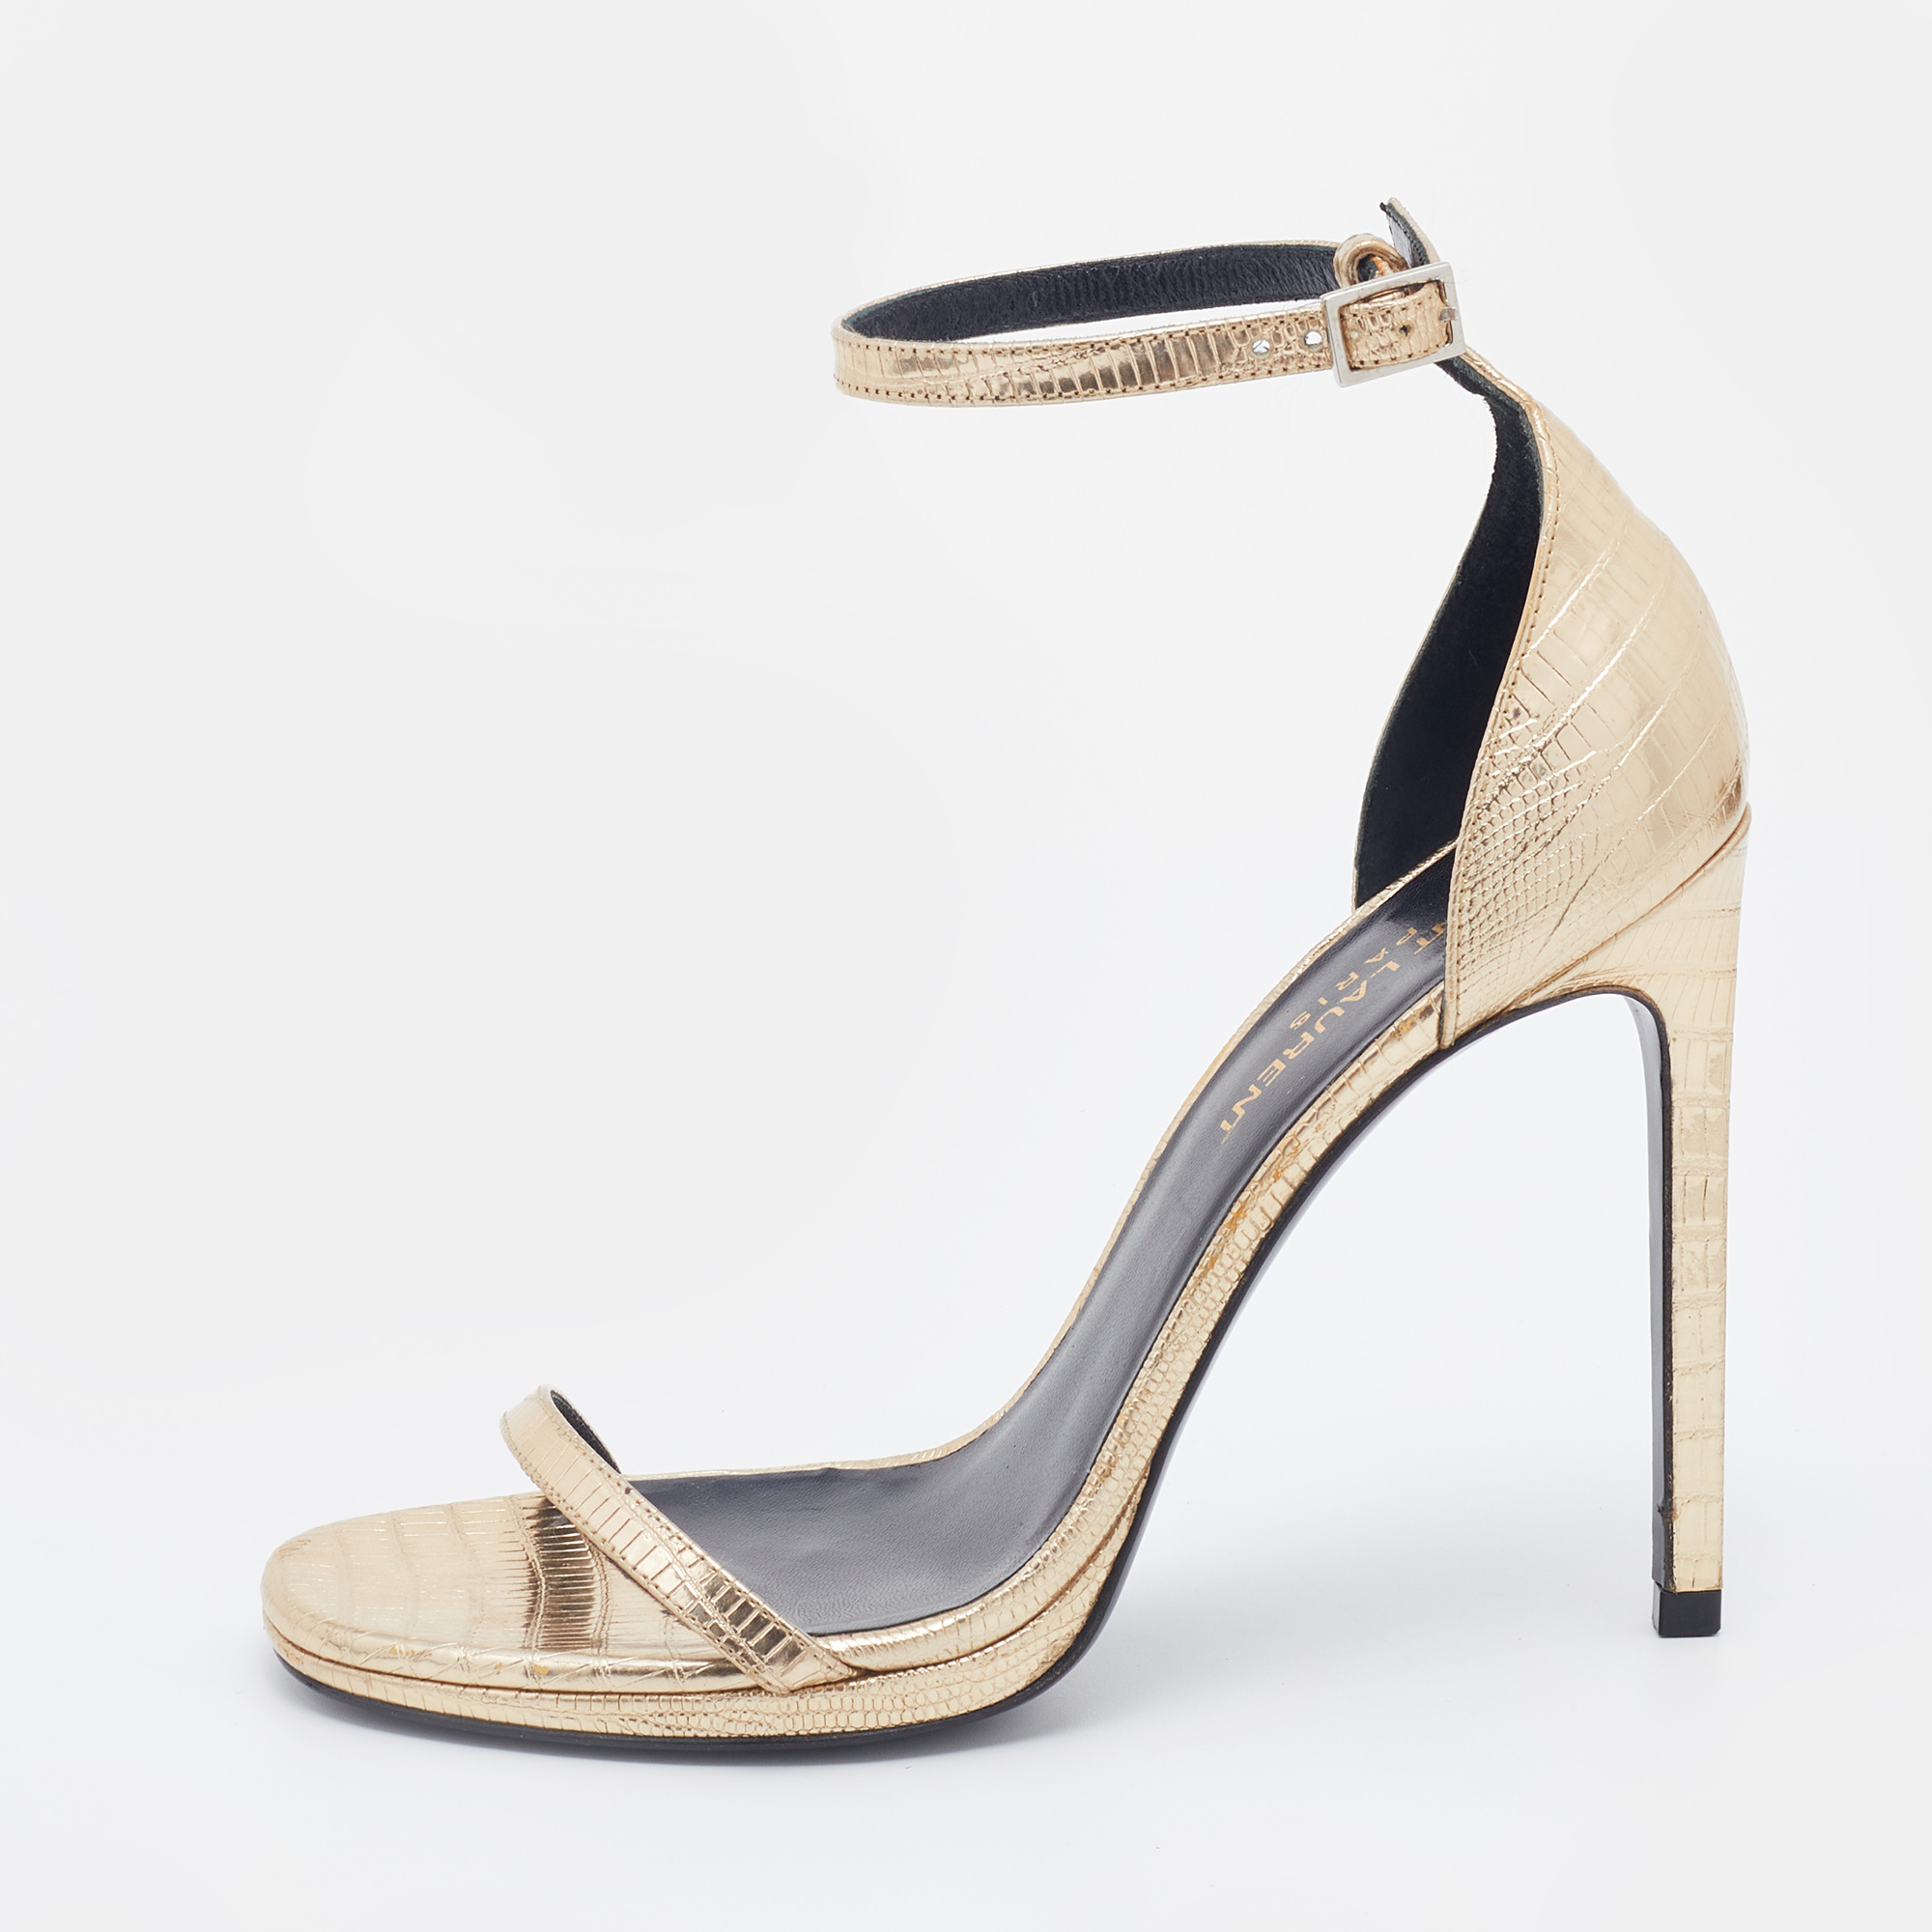 Pre-owned Saint Laurent Metallic Gold Lizard Embossed Leather Amber Ankle Strap Sandals Size 36